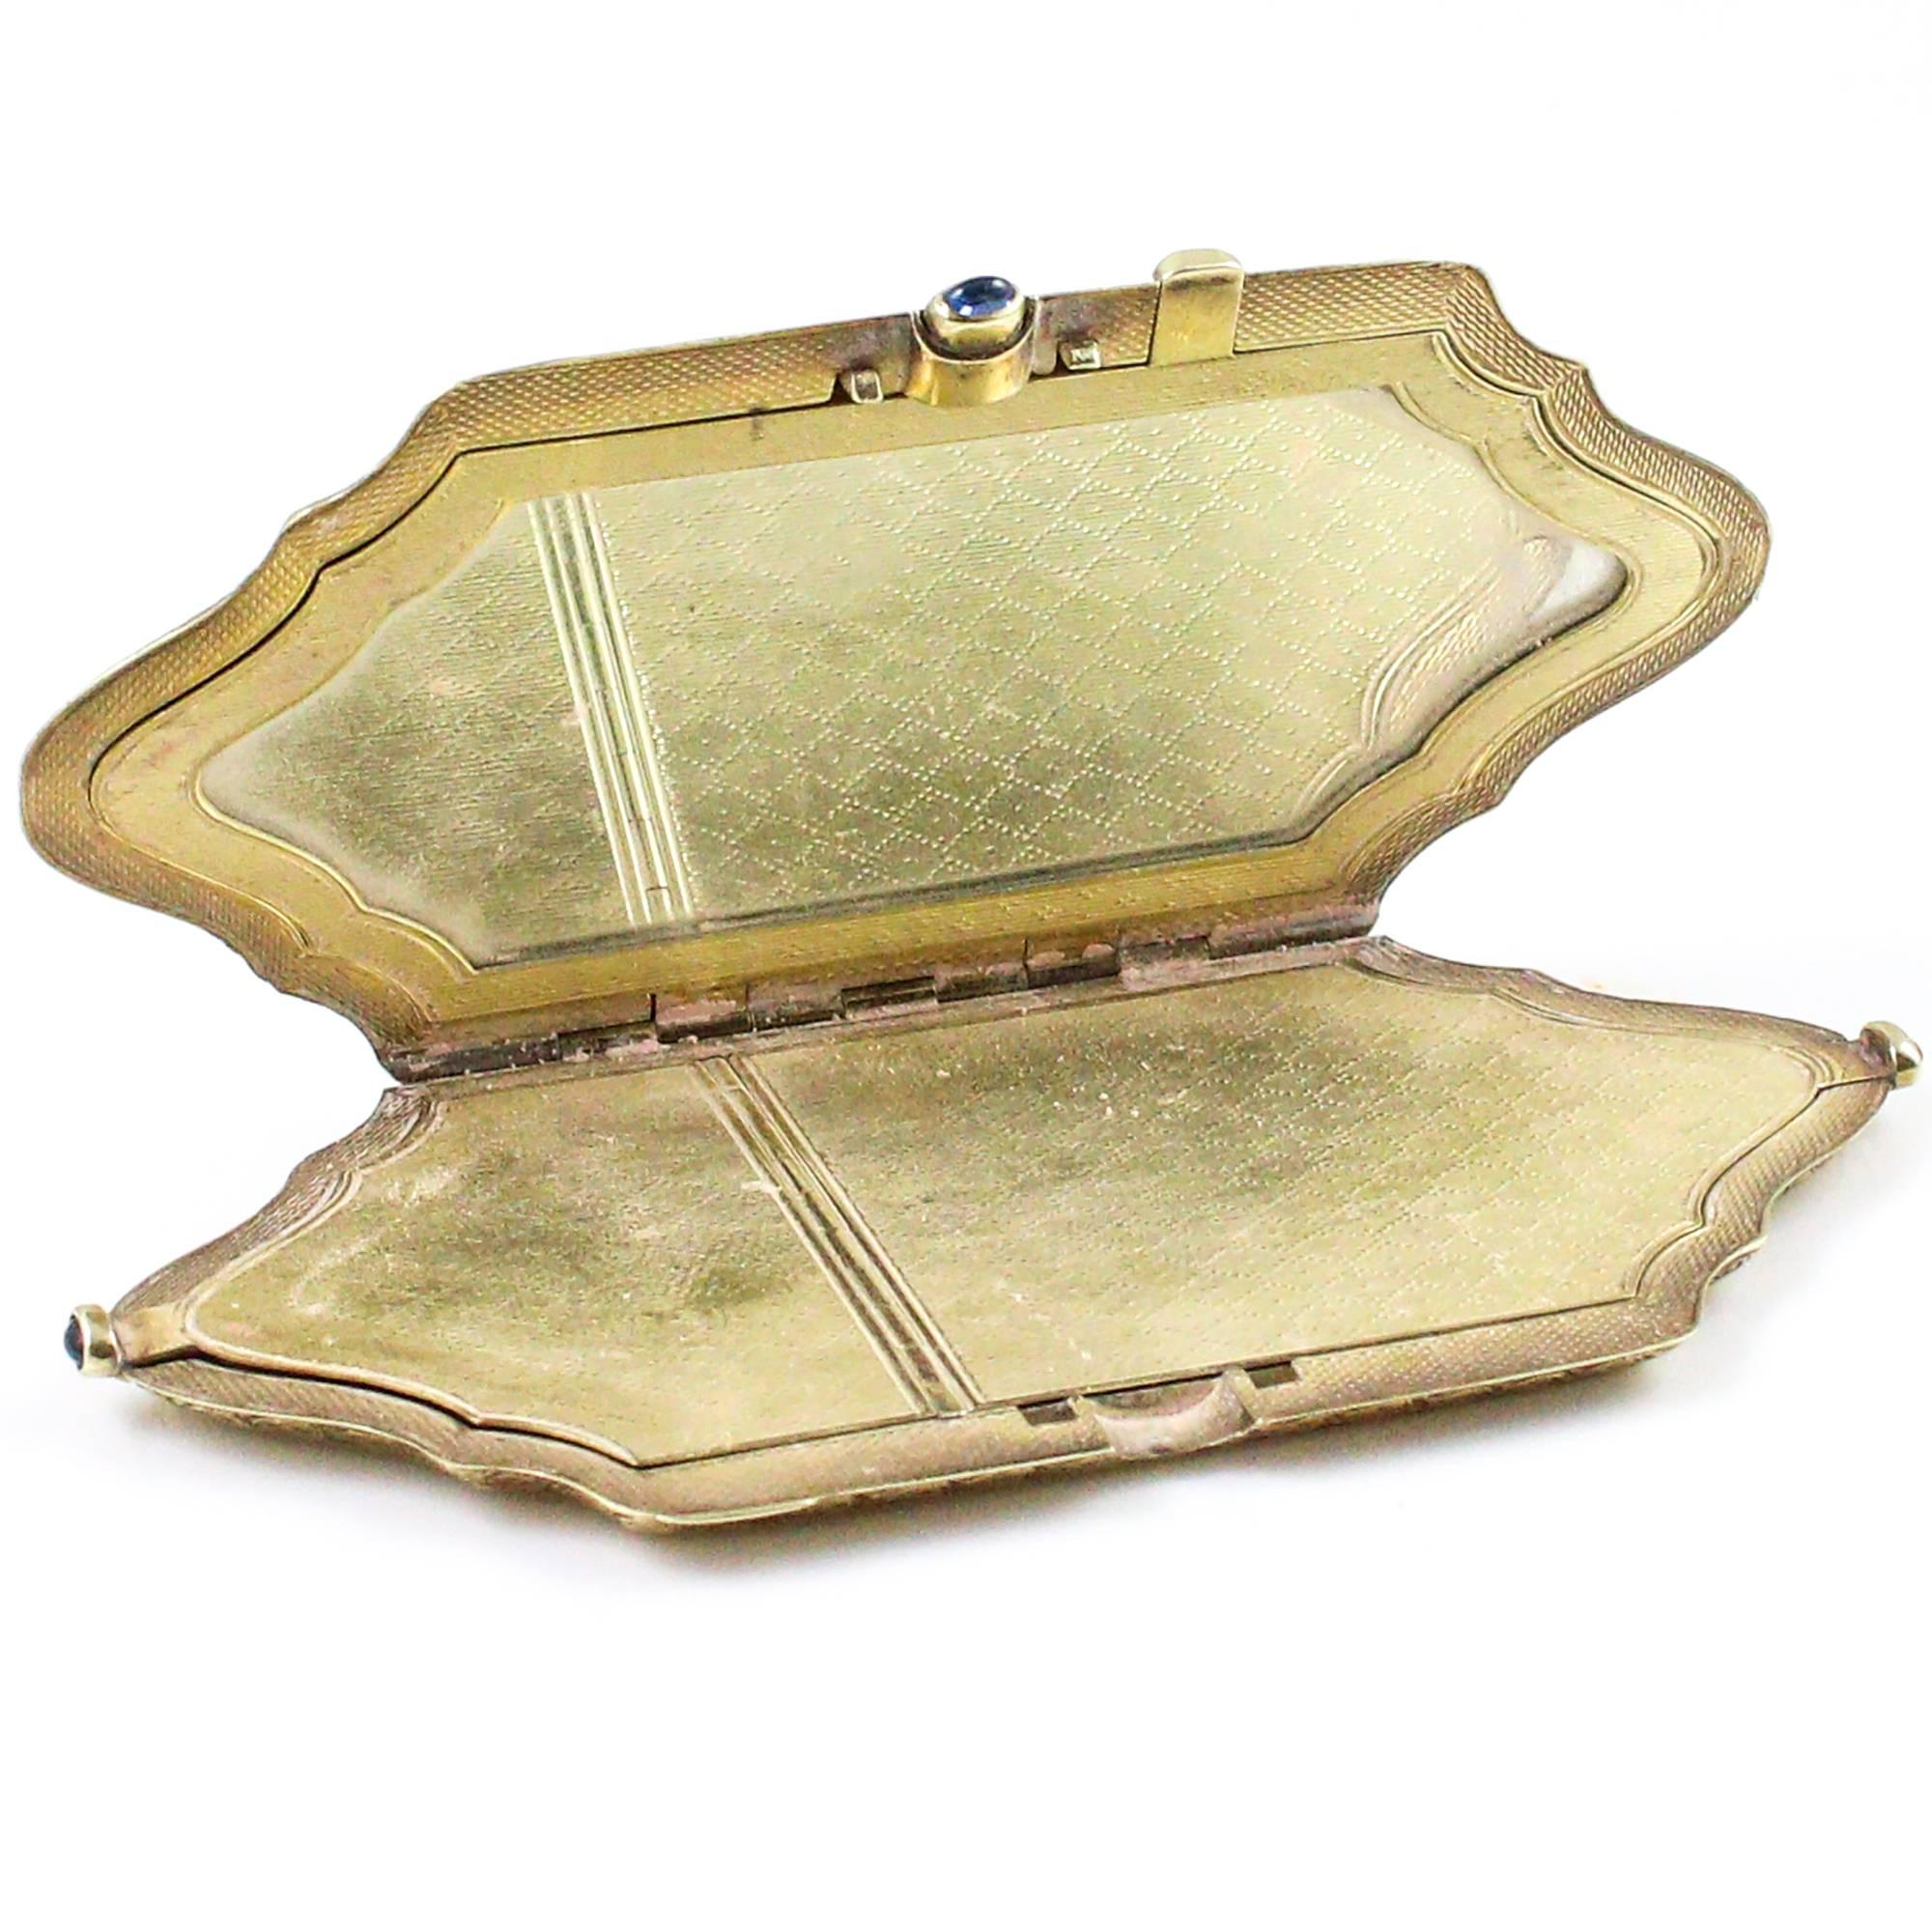 Cabochon Exquisite Gold Engraved Compact With Sapphire Accents